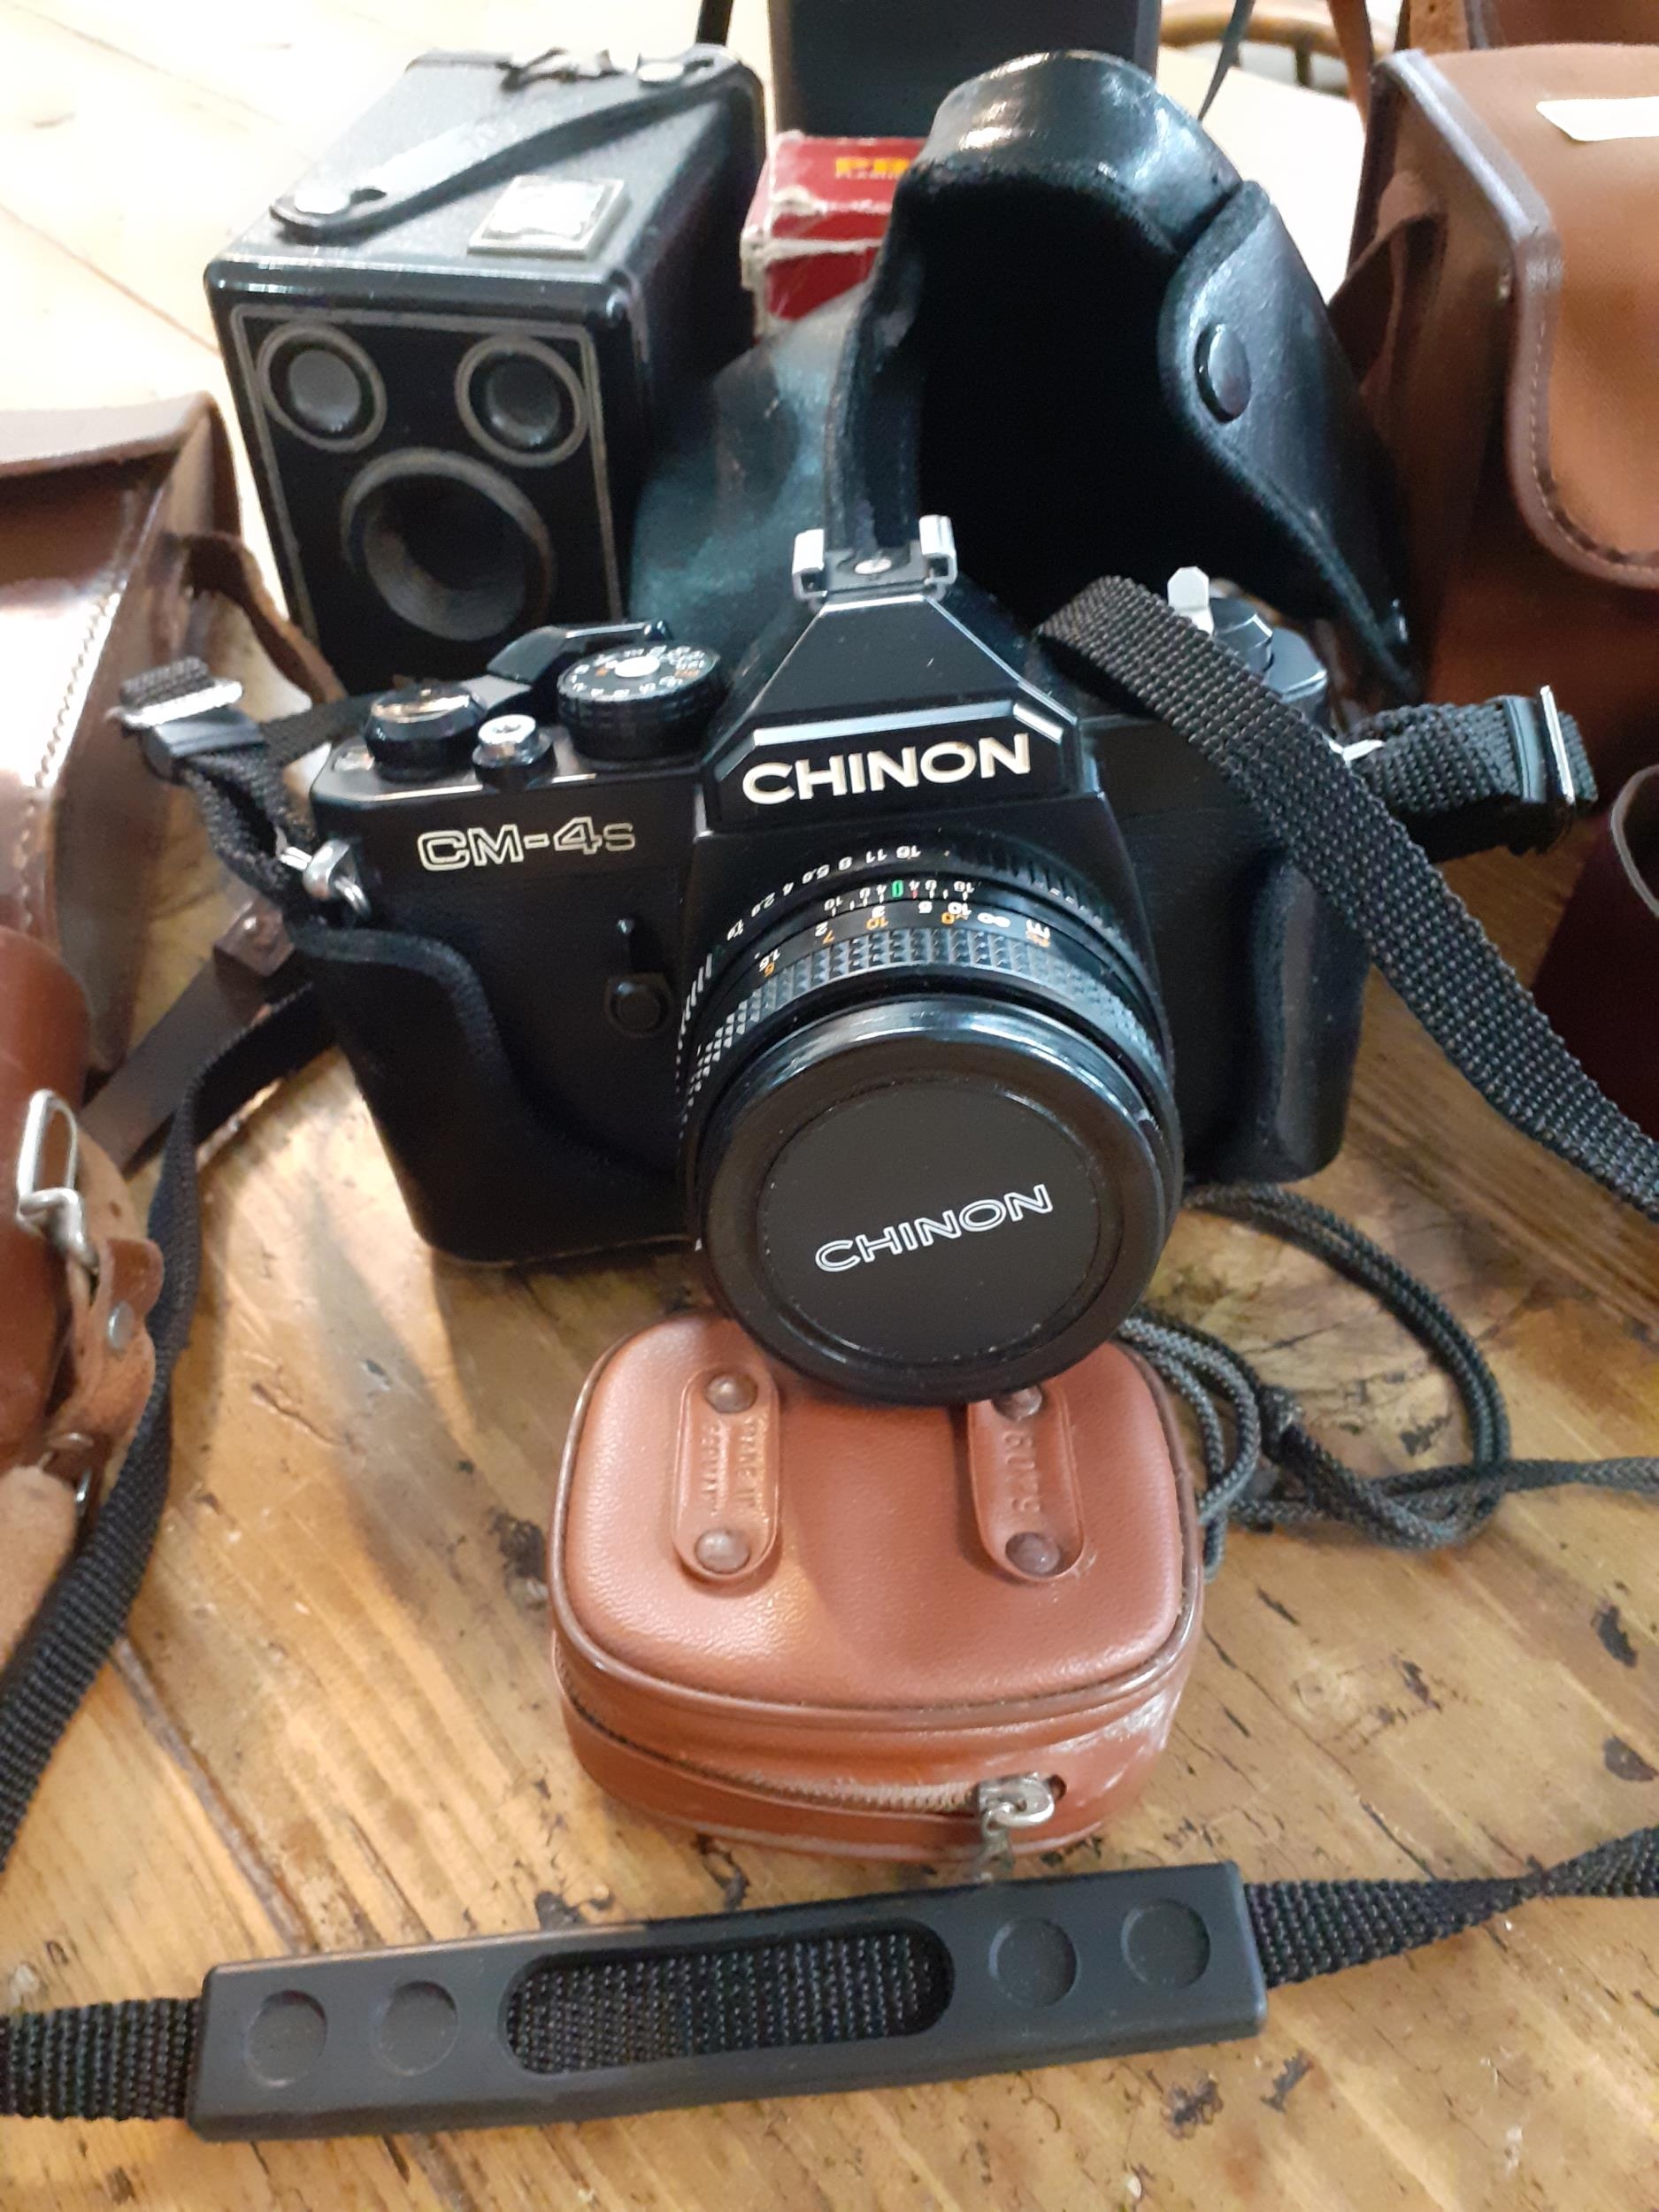 A quantity of vintage cameras and accessories to include a Chinon CM-4S, Location: SL - Image 2 of 2